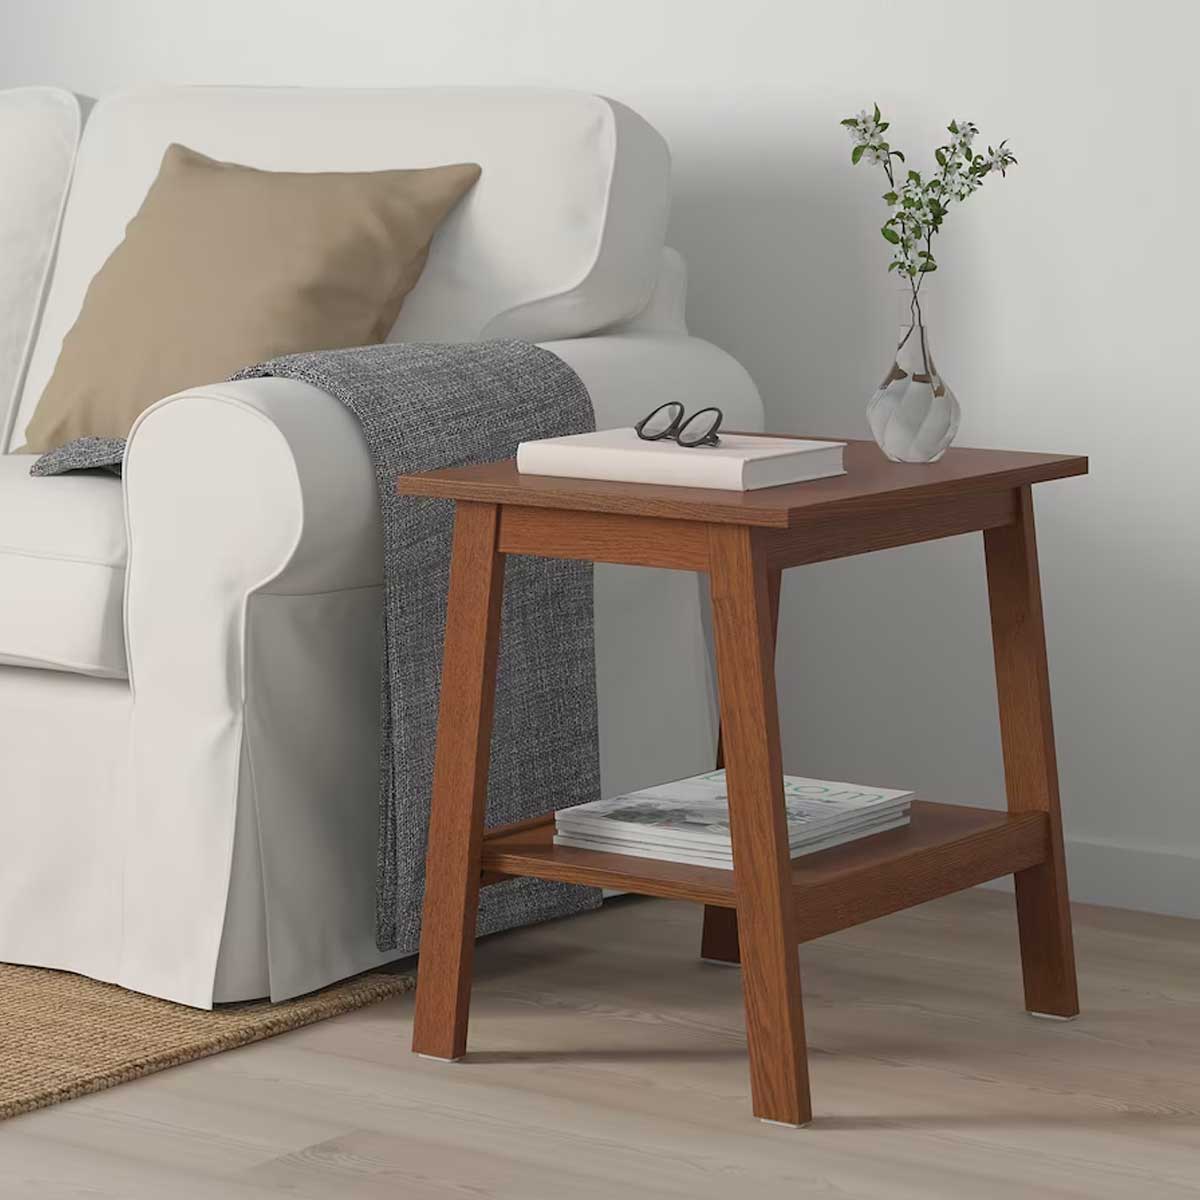 Lunnarp side table white